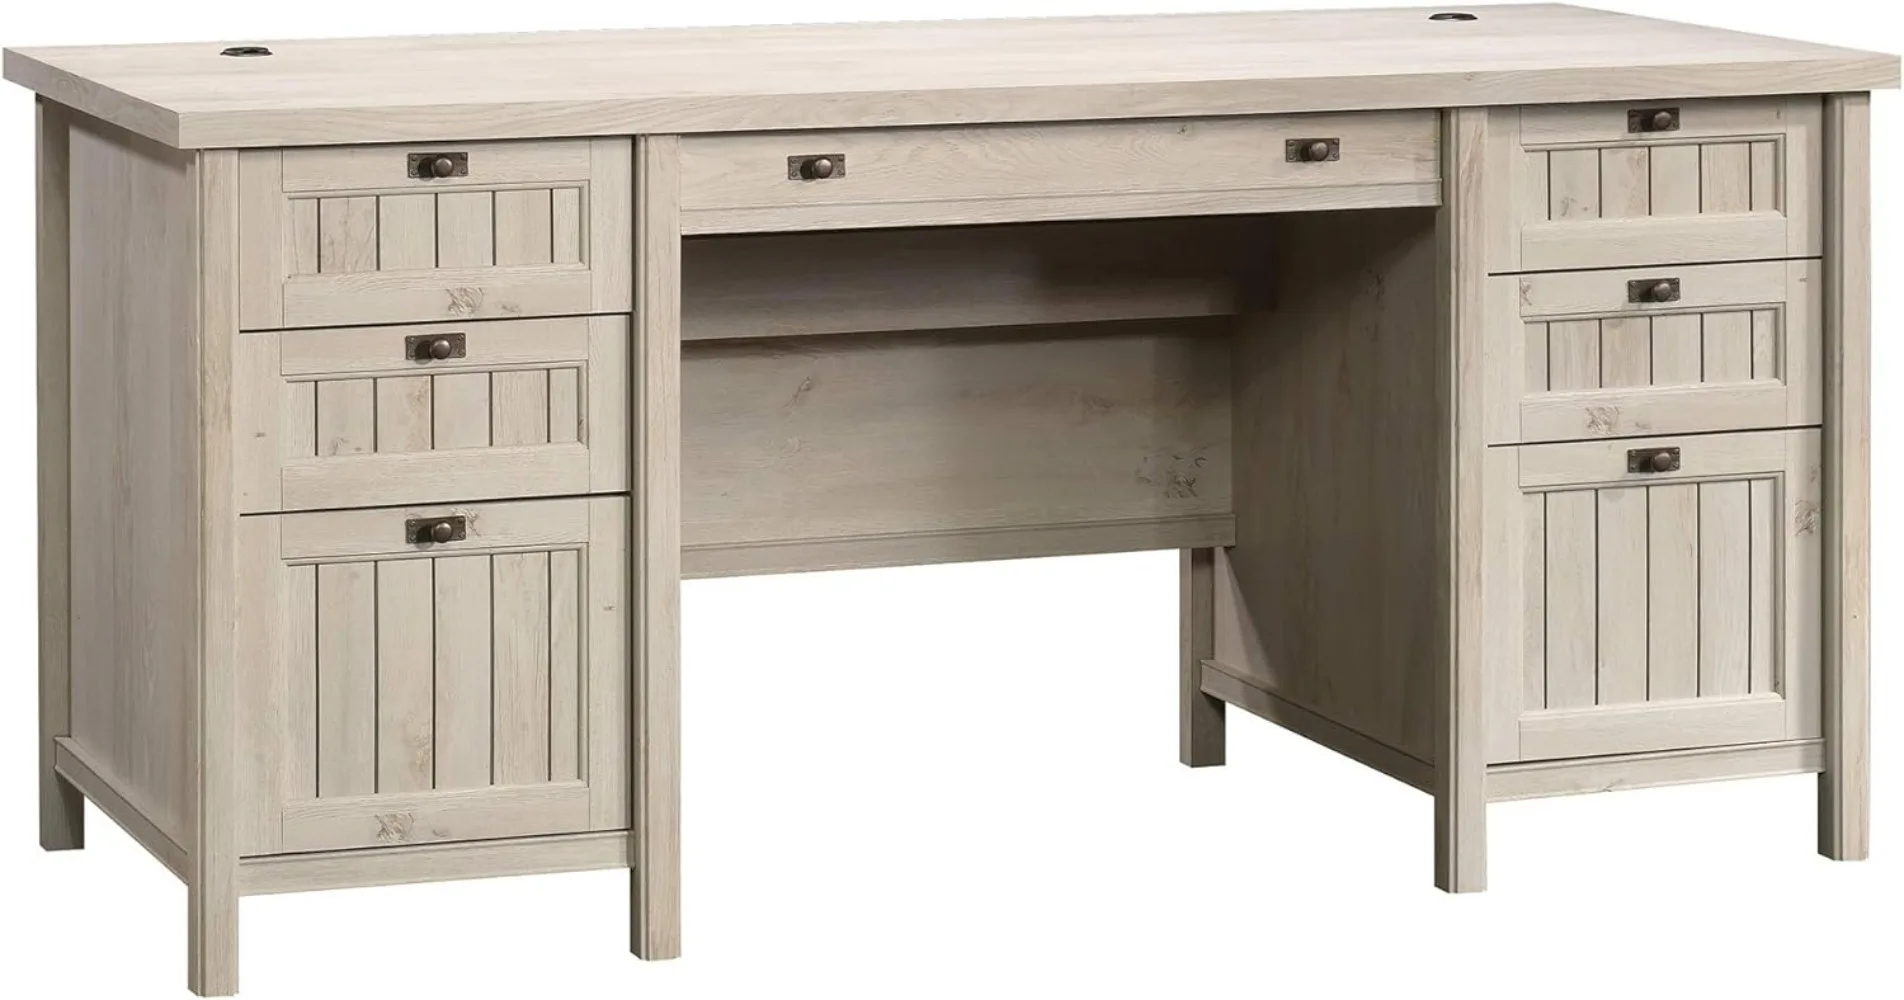 

Sauder Costa Executive Desk, L: 65.12" X W: 29.53" X H: 30.0", Chalked Chestnut Finish Pencil Drawer and Four Storage Drawers